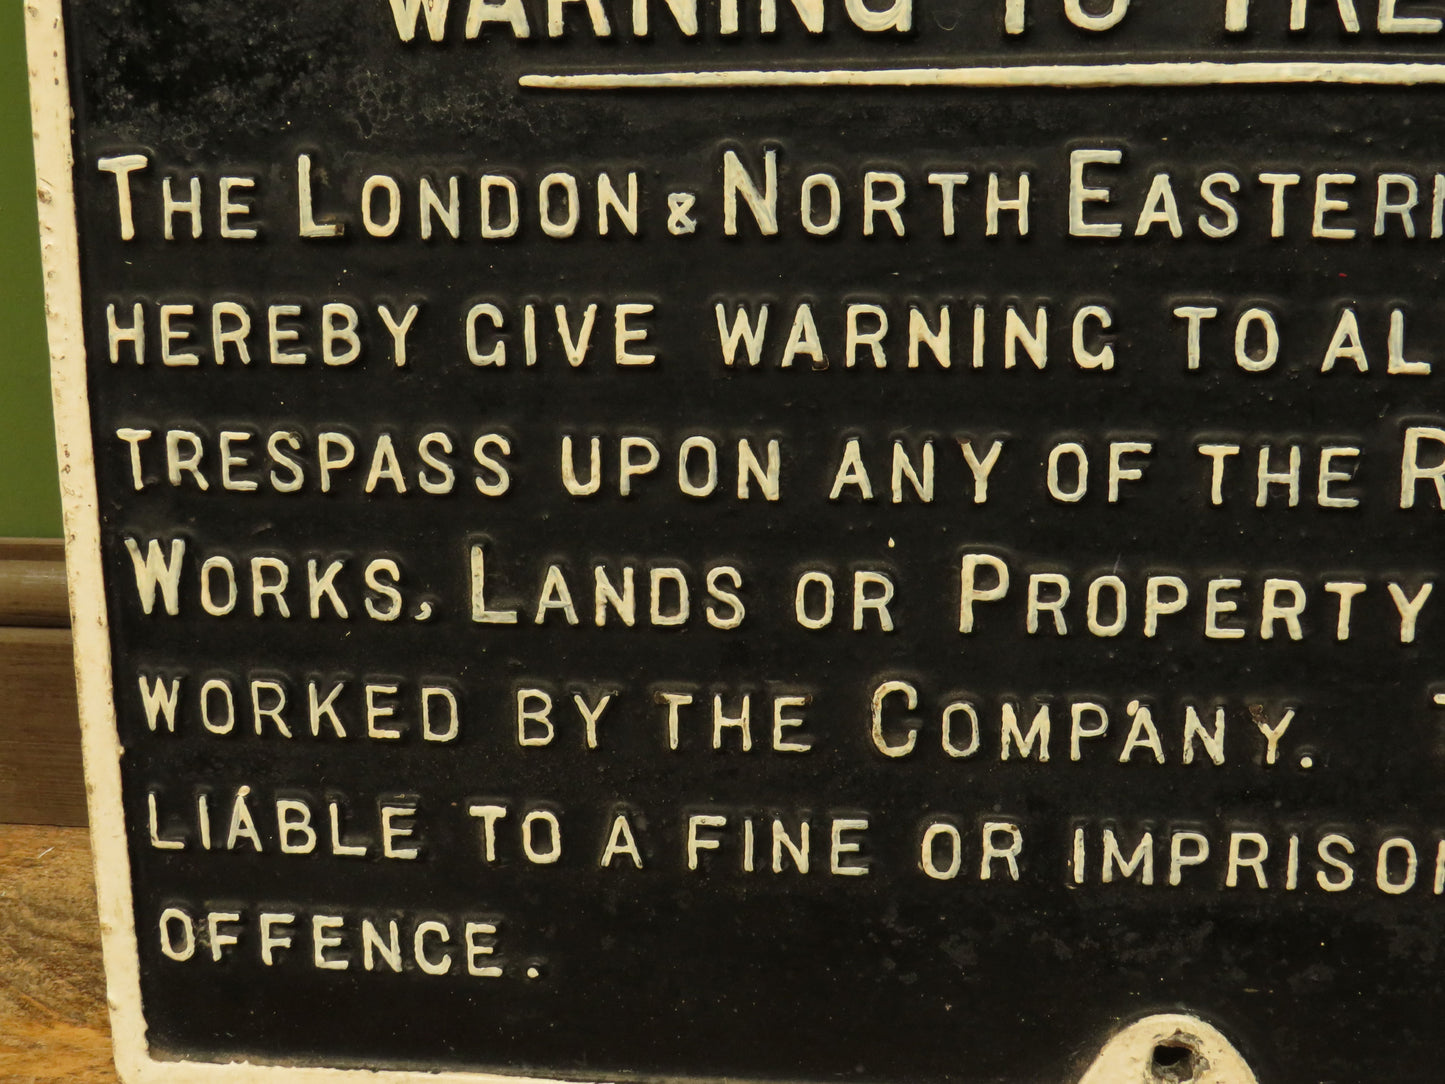 Railway Trespass Warning Sign for London and North Eastern Railway